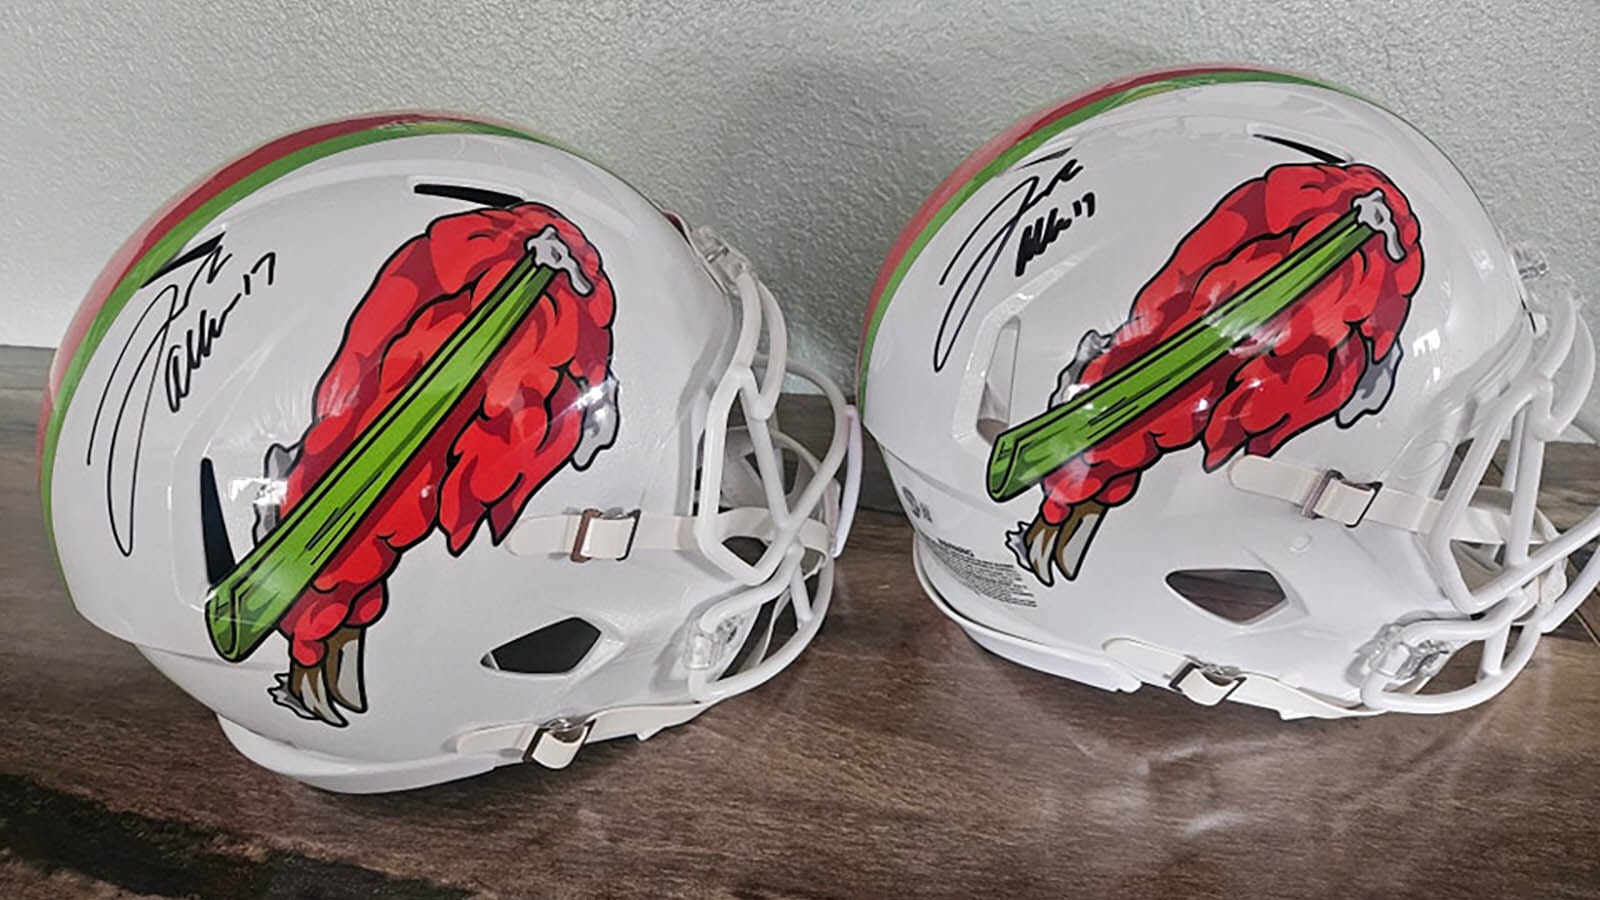 When the Buffalo Bills meet the world's best Buffalo Wings, you get this unique helmet. These are signed by Josh Allen.